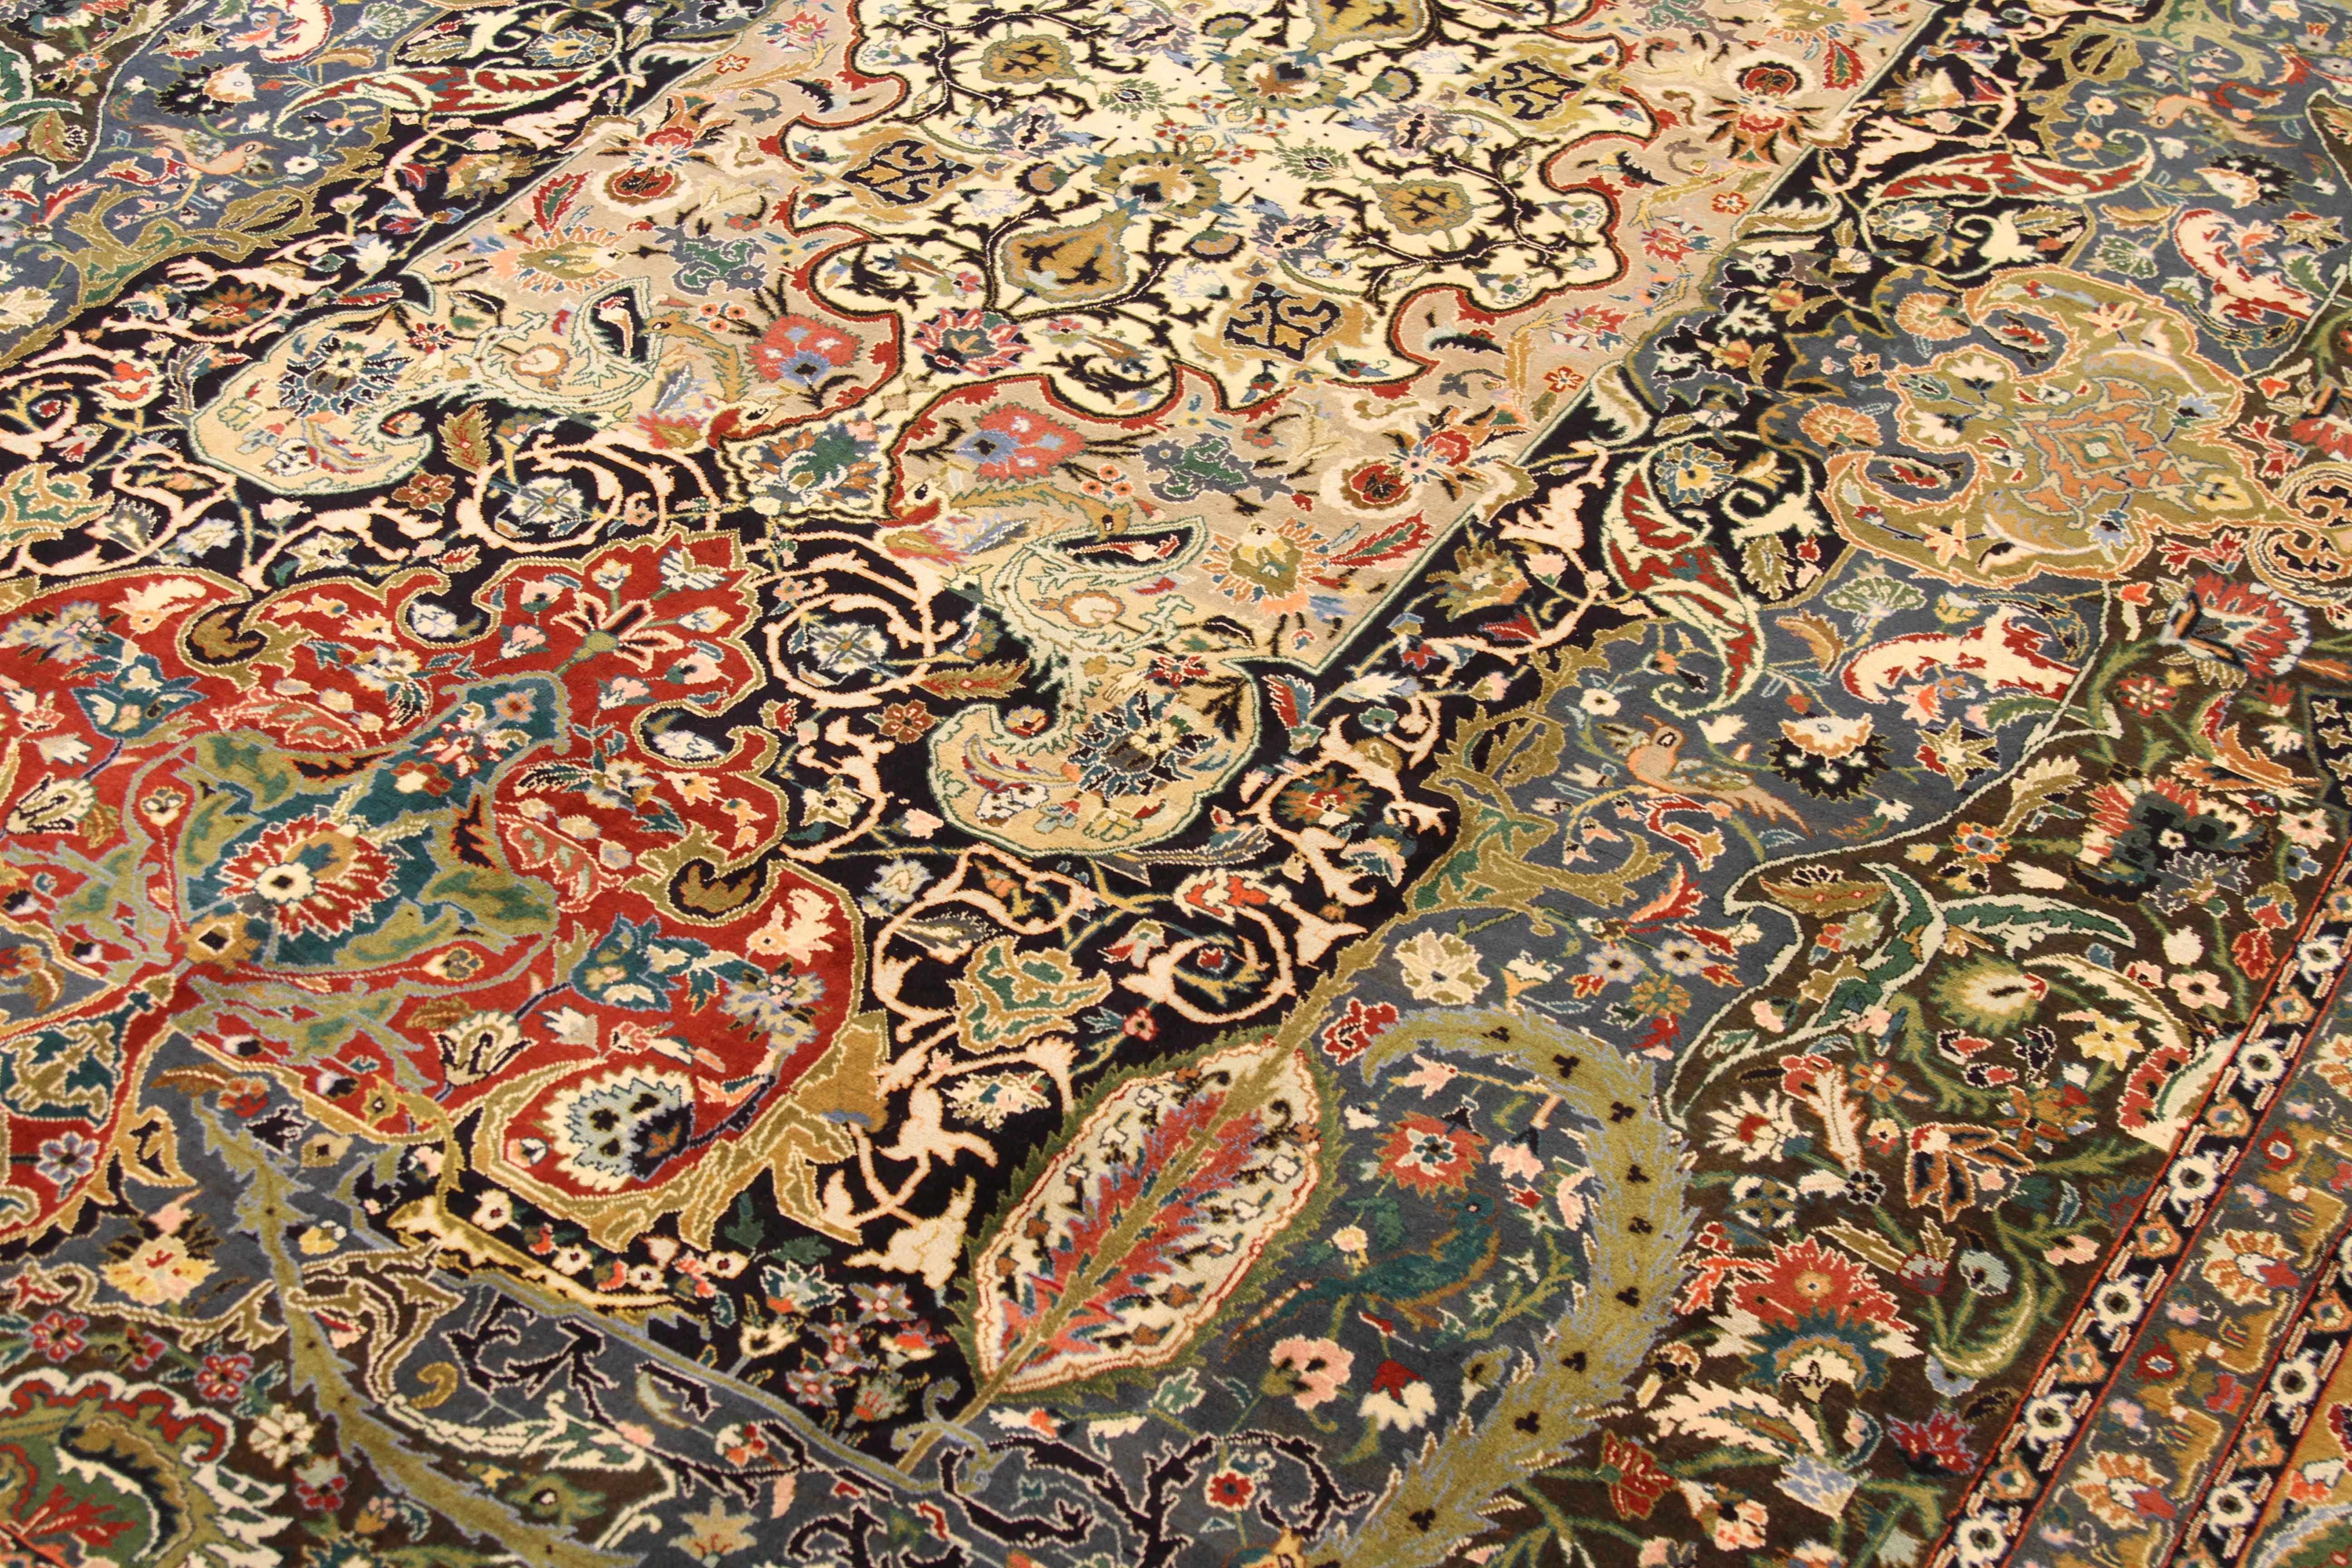 Antique Persian rug handmade in the 1960s. Weavers used Fine and exquisite wool colored with rich all-organic vegetable dyes. It follows a traditional style rooted in the Classic designs of world-famous Safavid carpets which were created in many